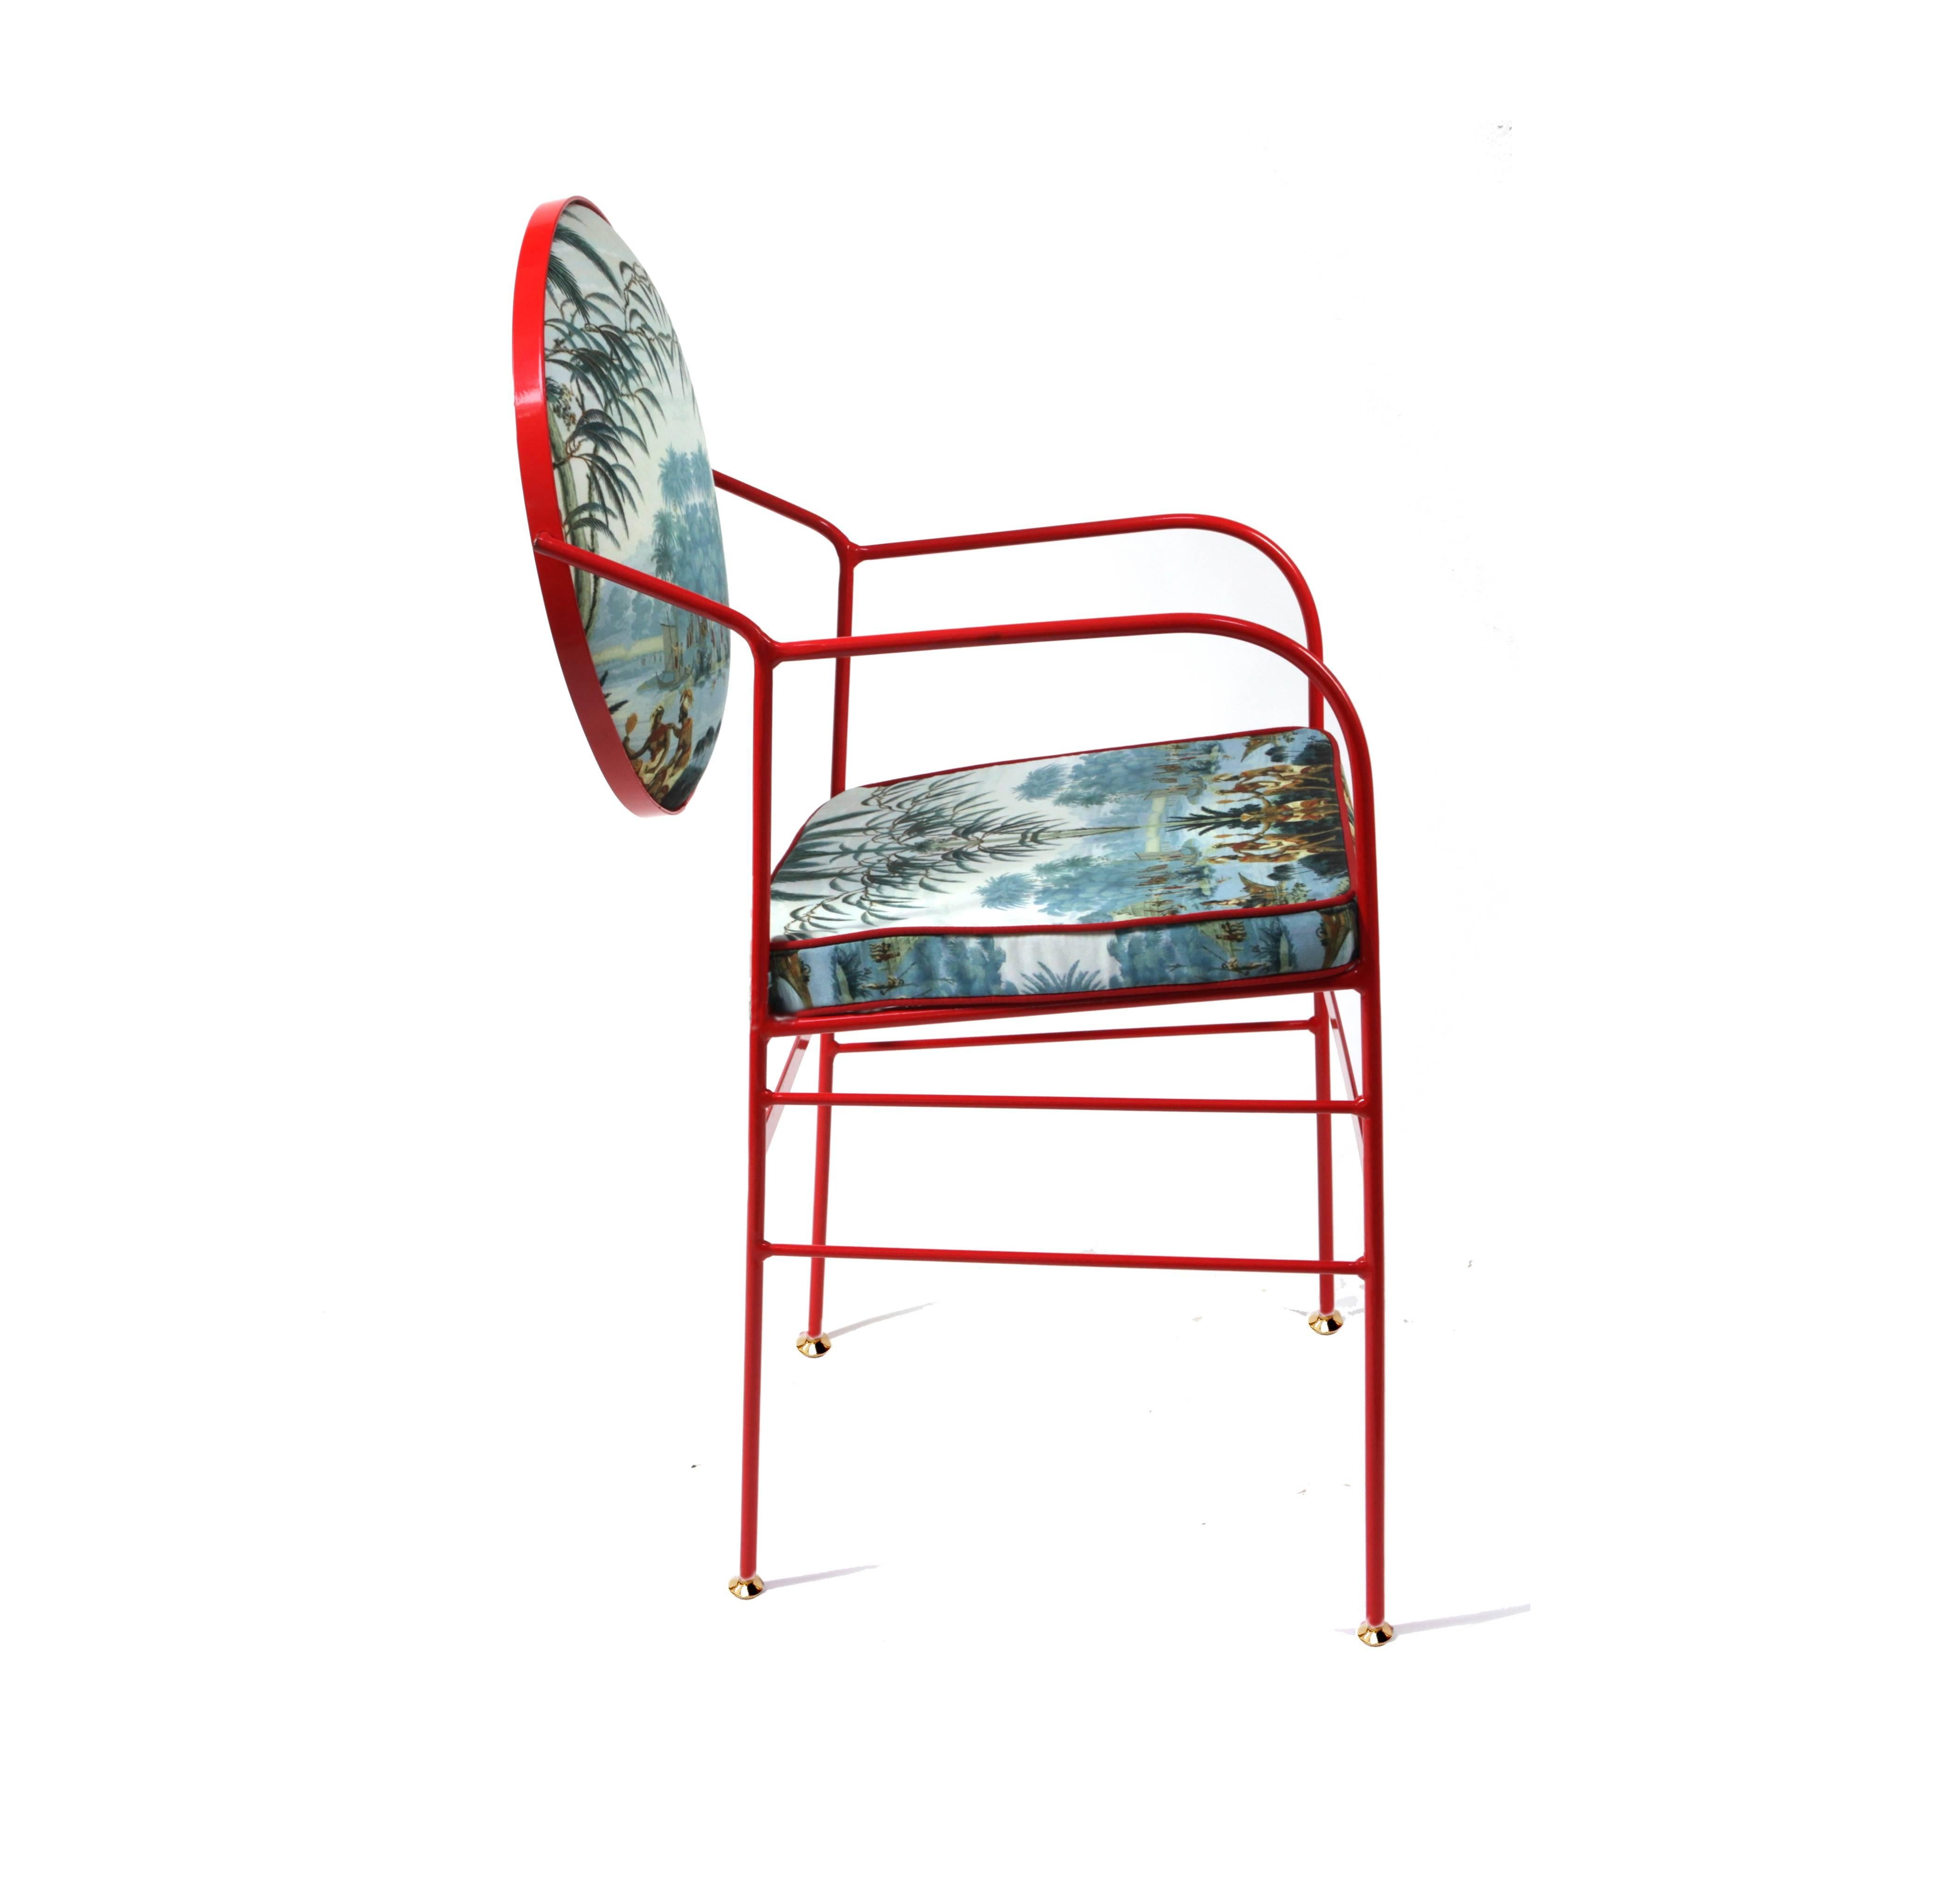 Other Luigina Red Escapes Chair by Sotow, Made in Italy